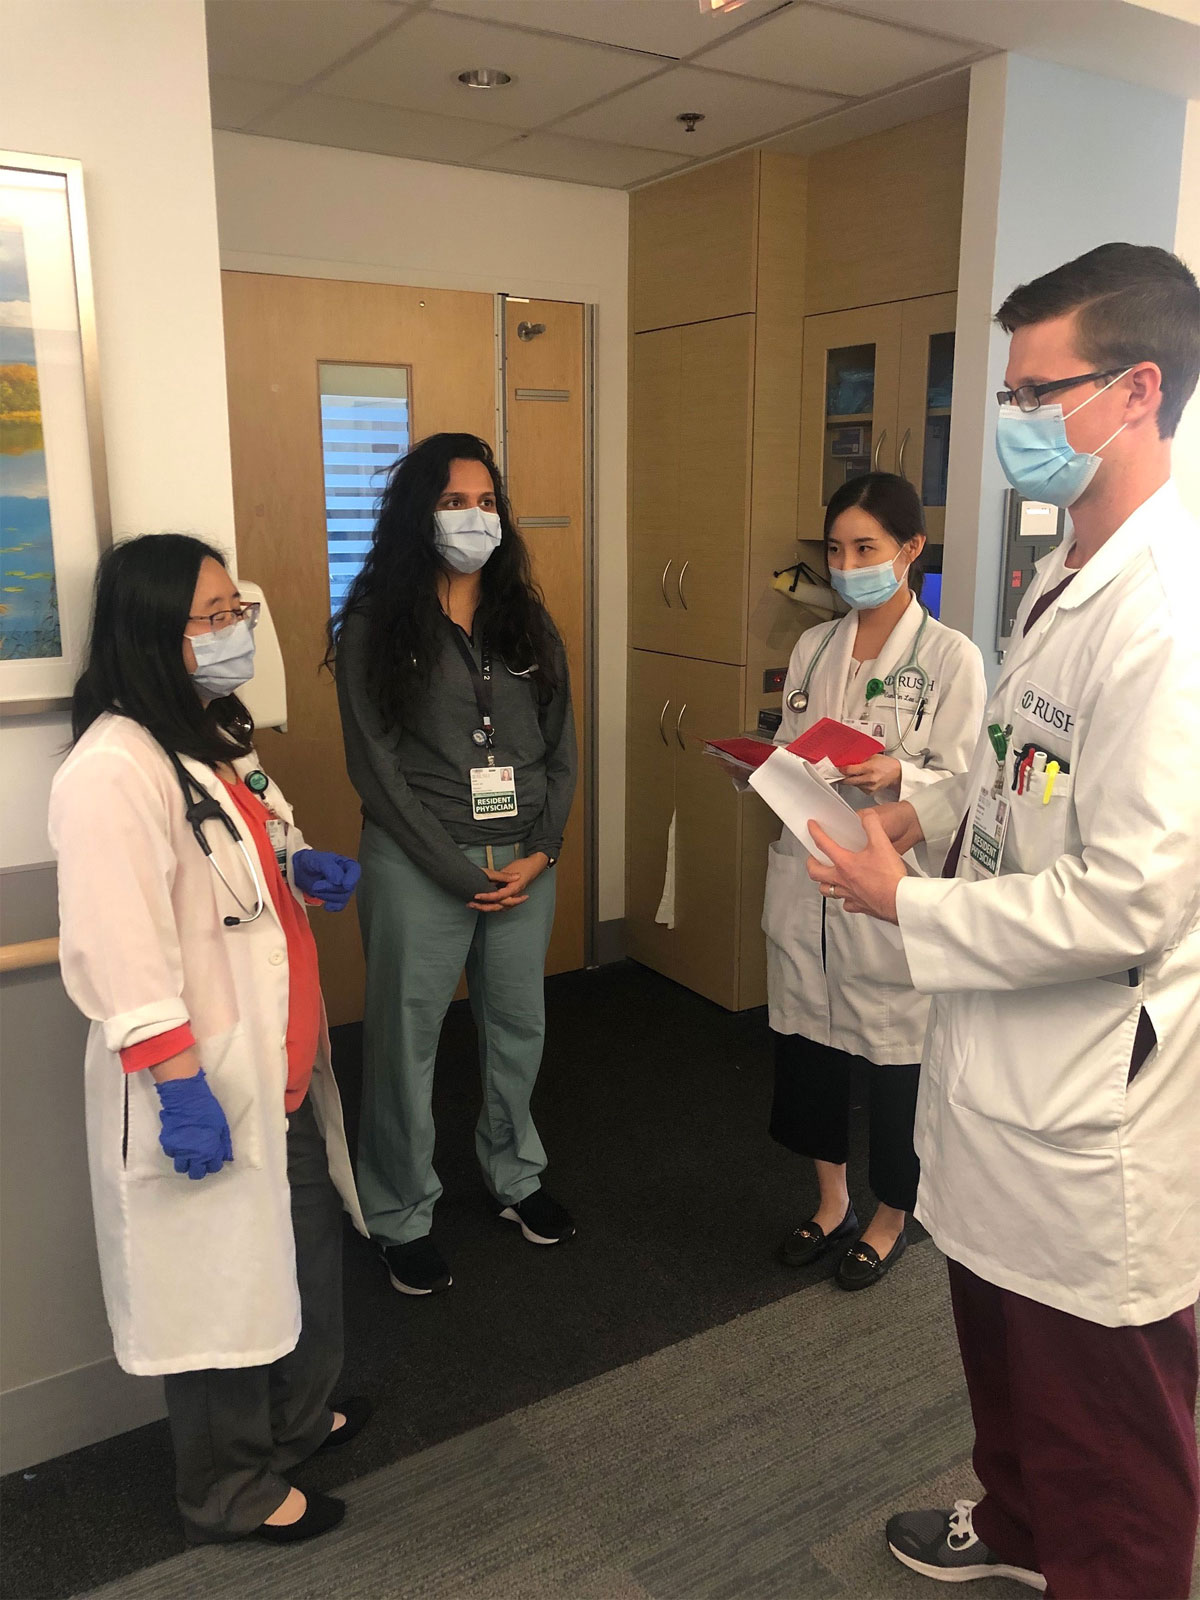 Four fellows wear masks and have a discussion in a hospital hallway.